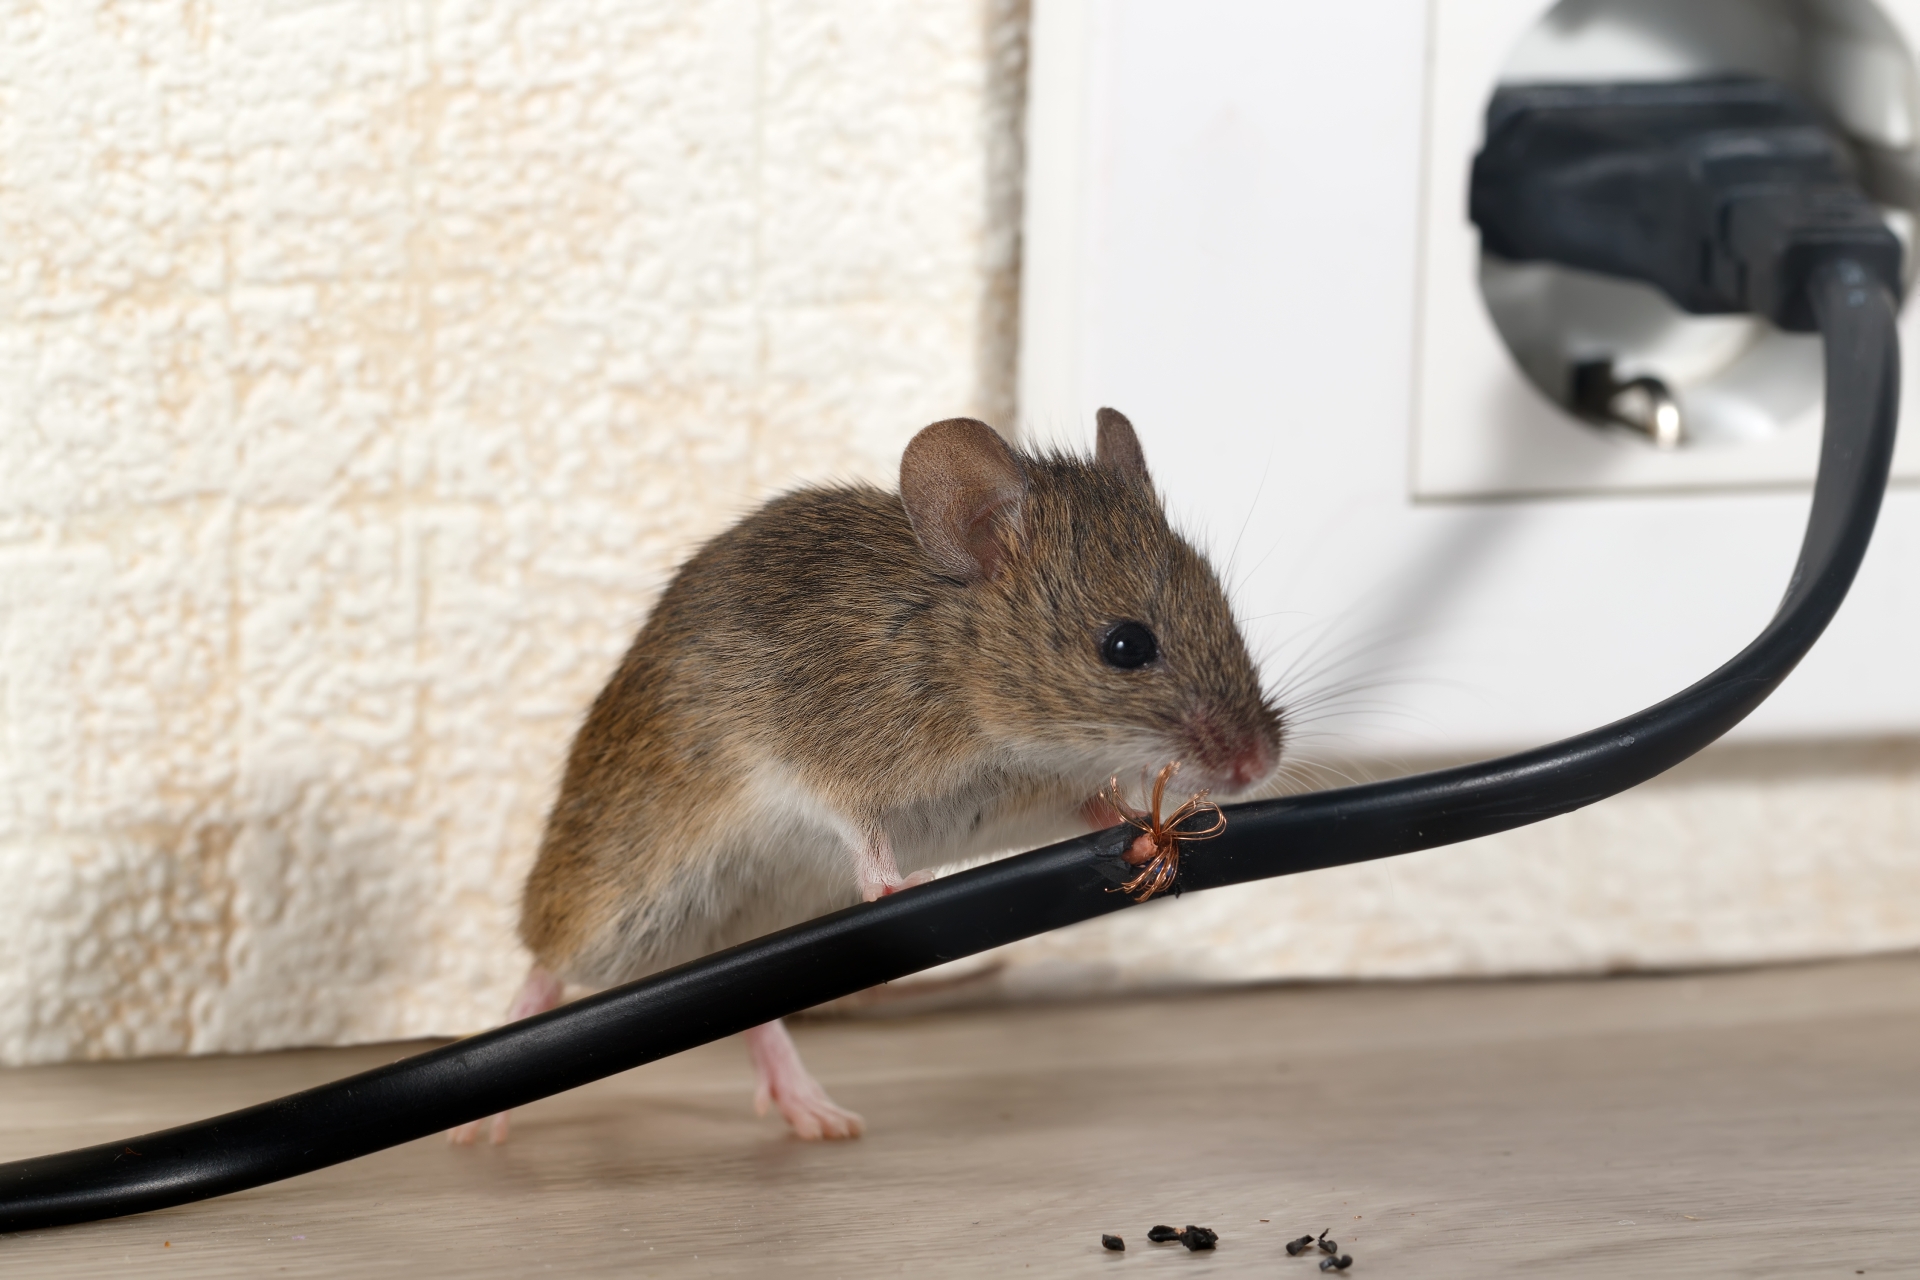 Mice Infestation, Pest Control in Archway, N19. Call Now 020 8166 9746